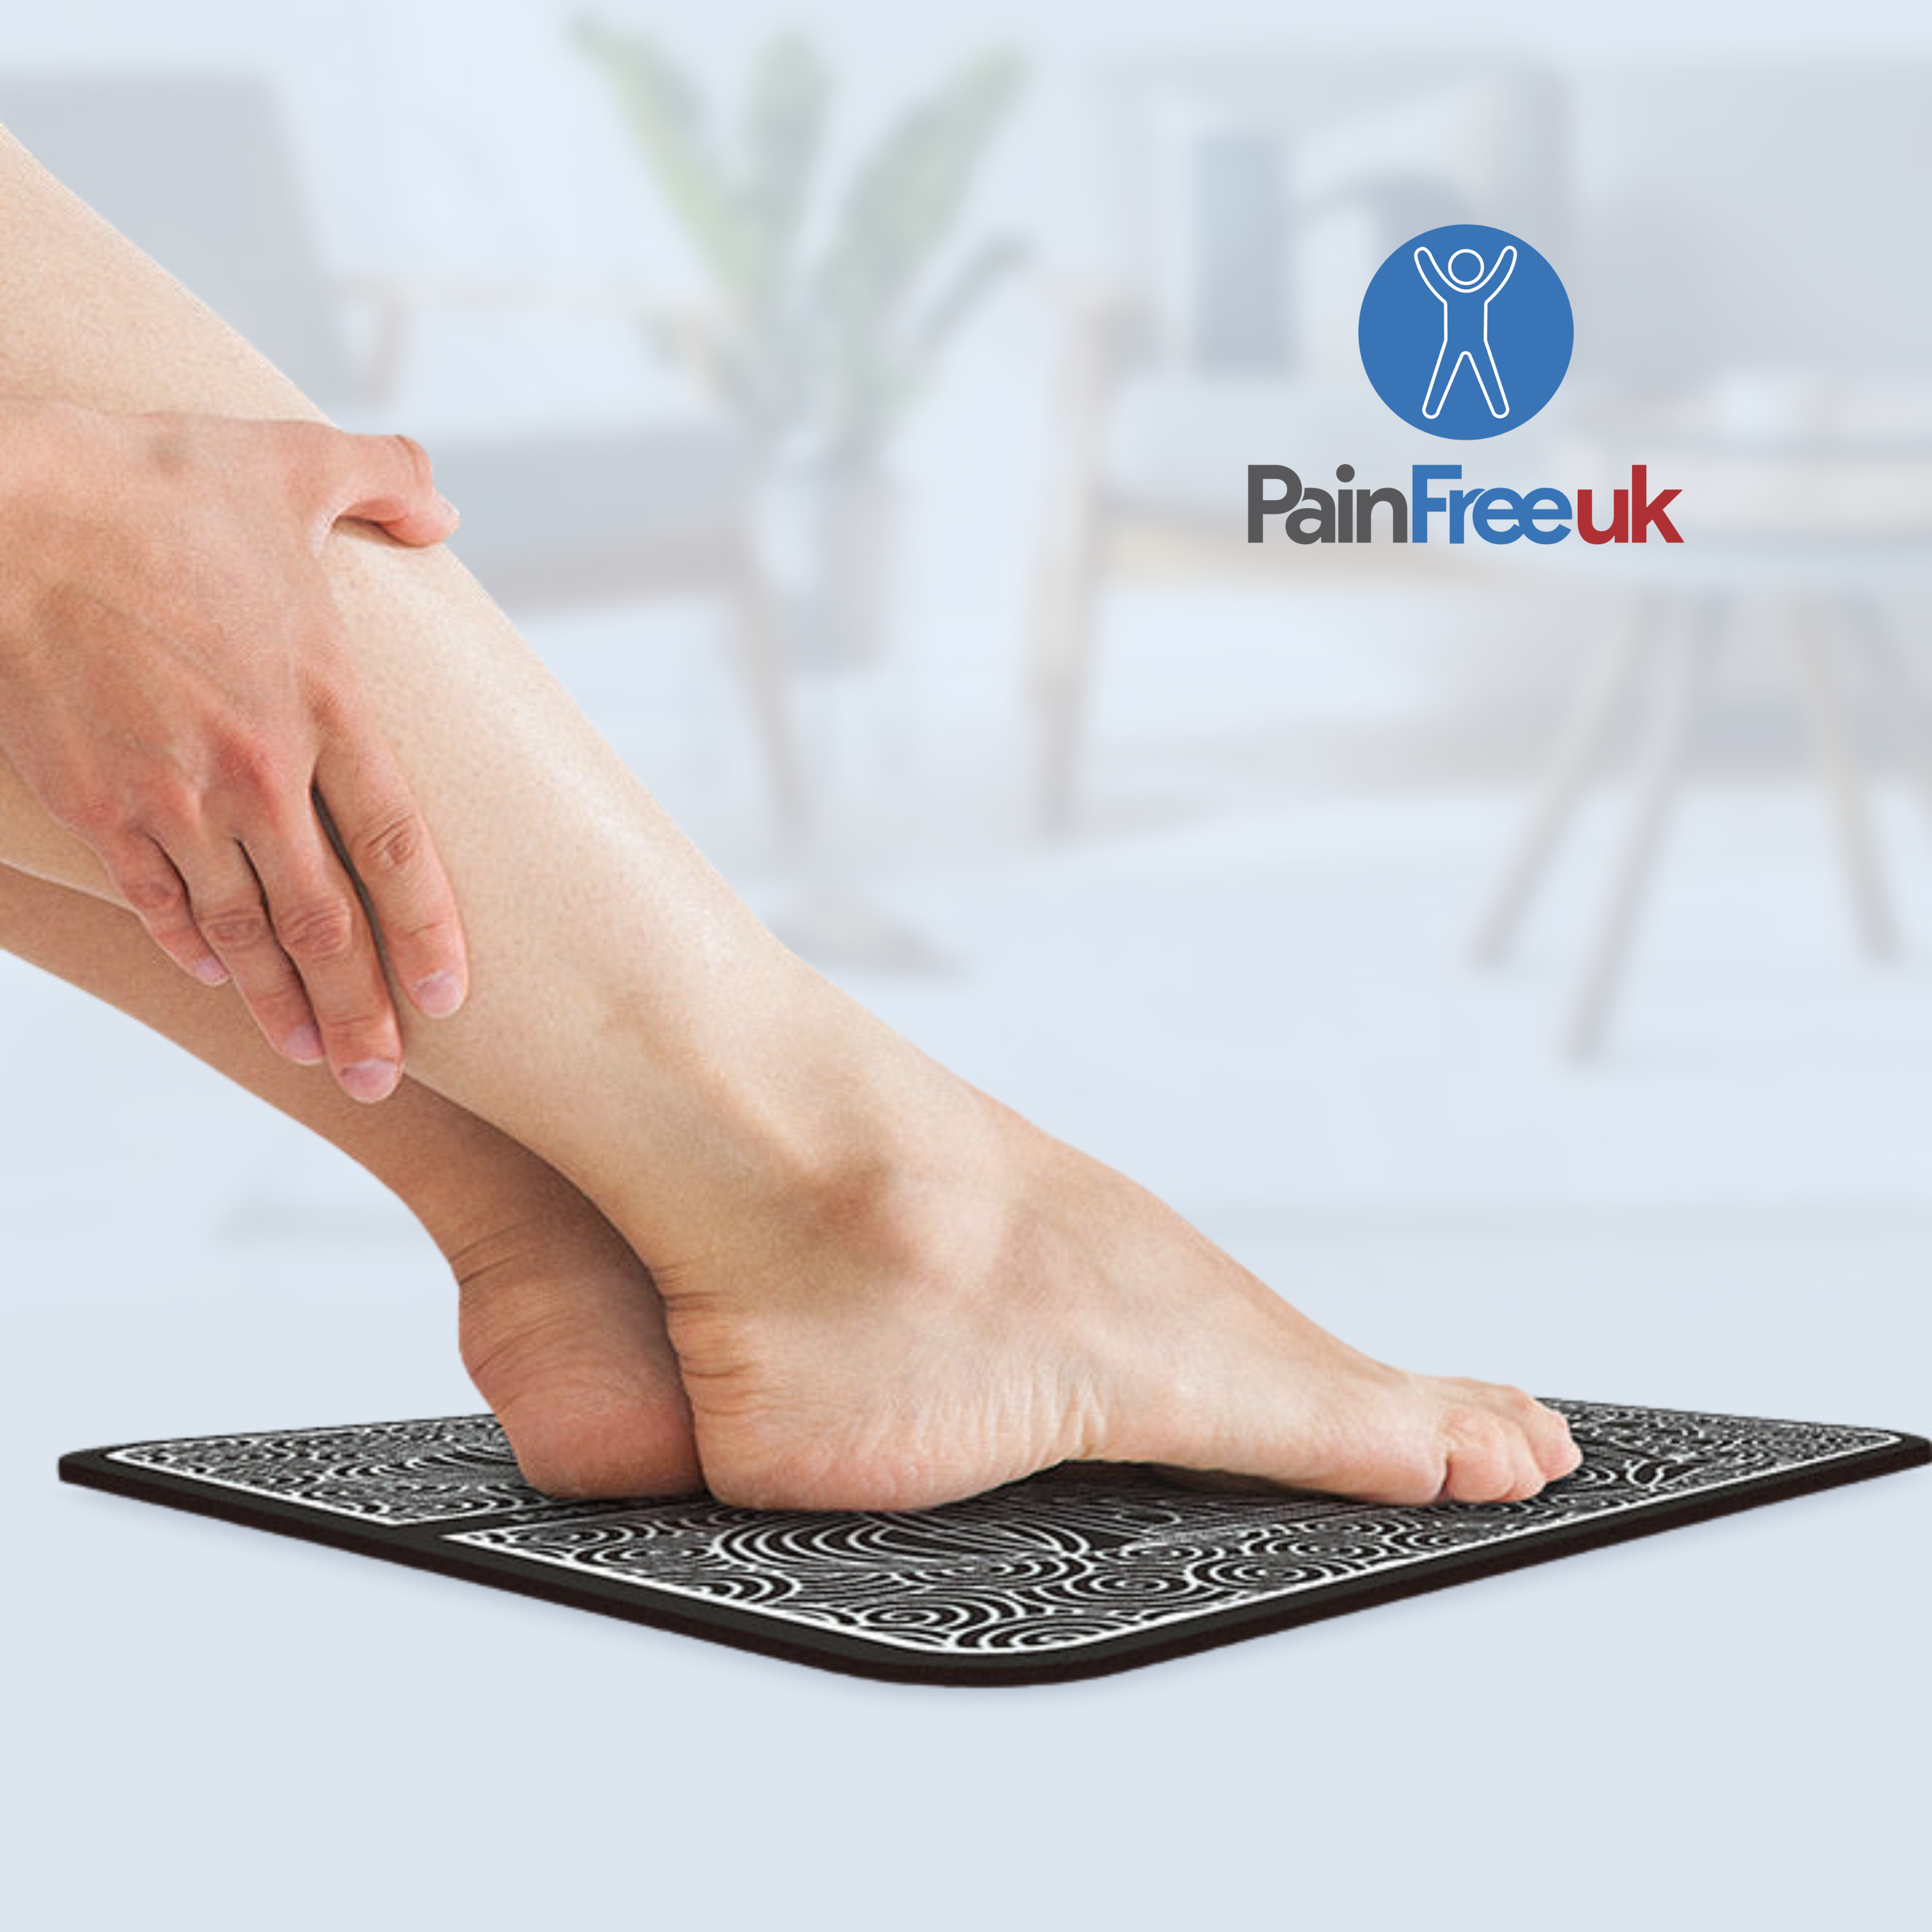 Pain Free UK™ Foot Massager - Quick Relief for Foot Pain in Just 15 Minutes a Day*